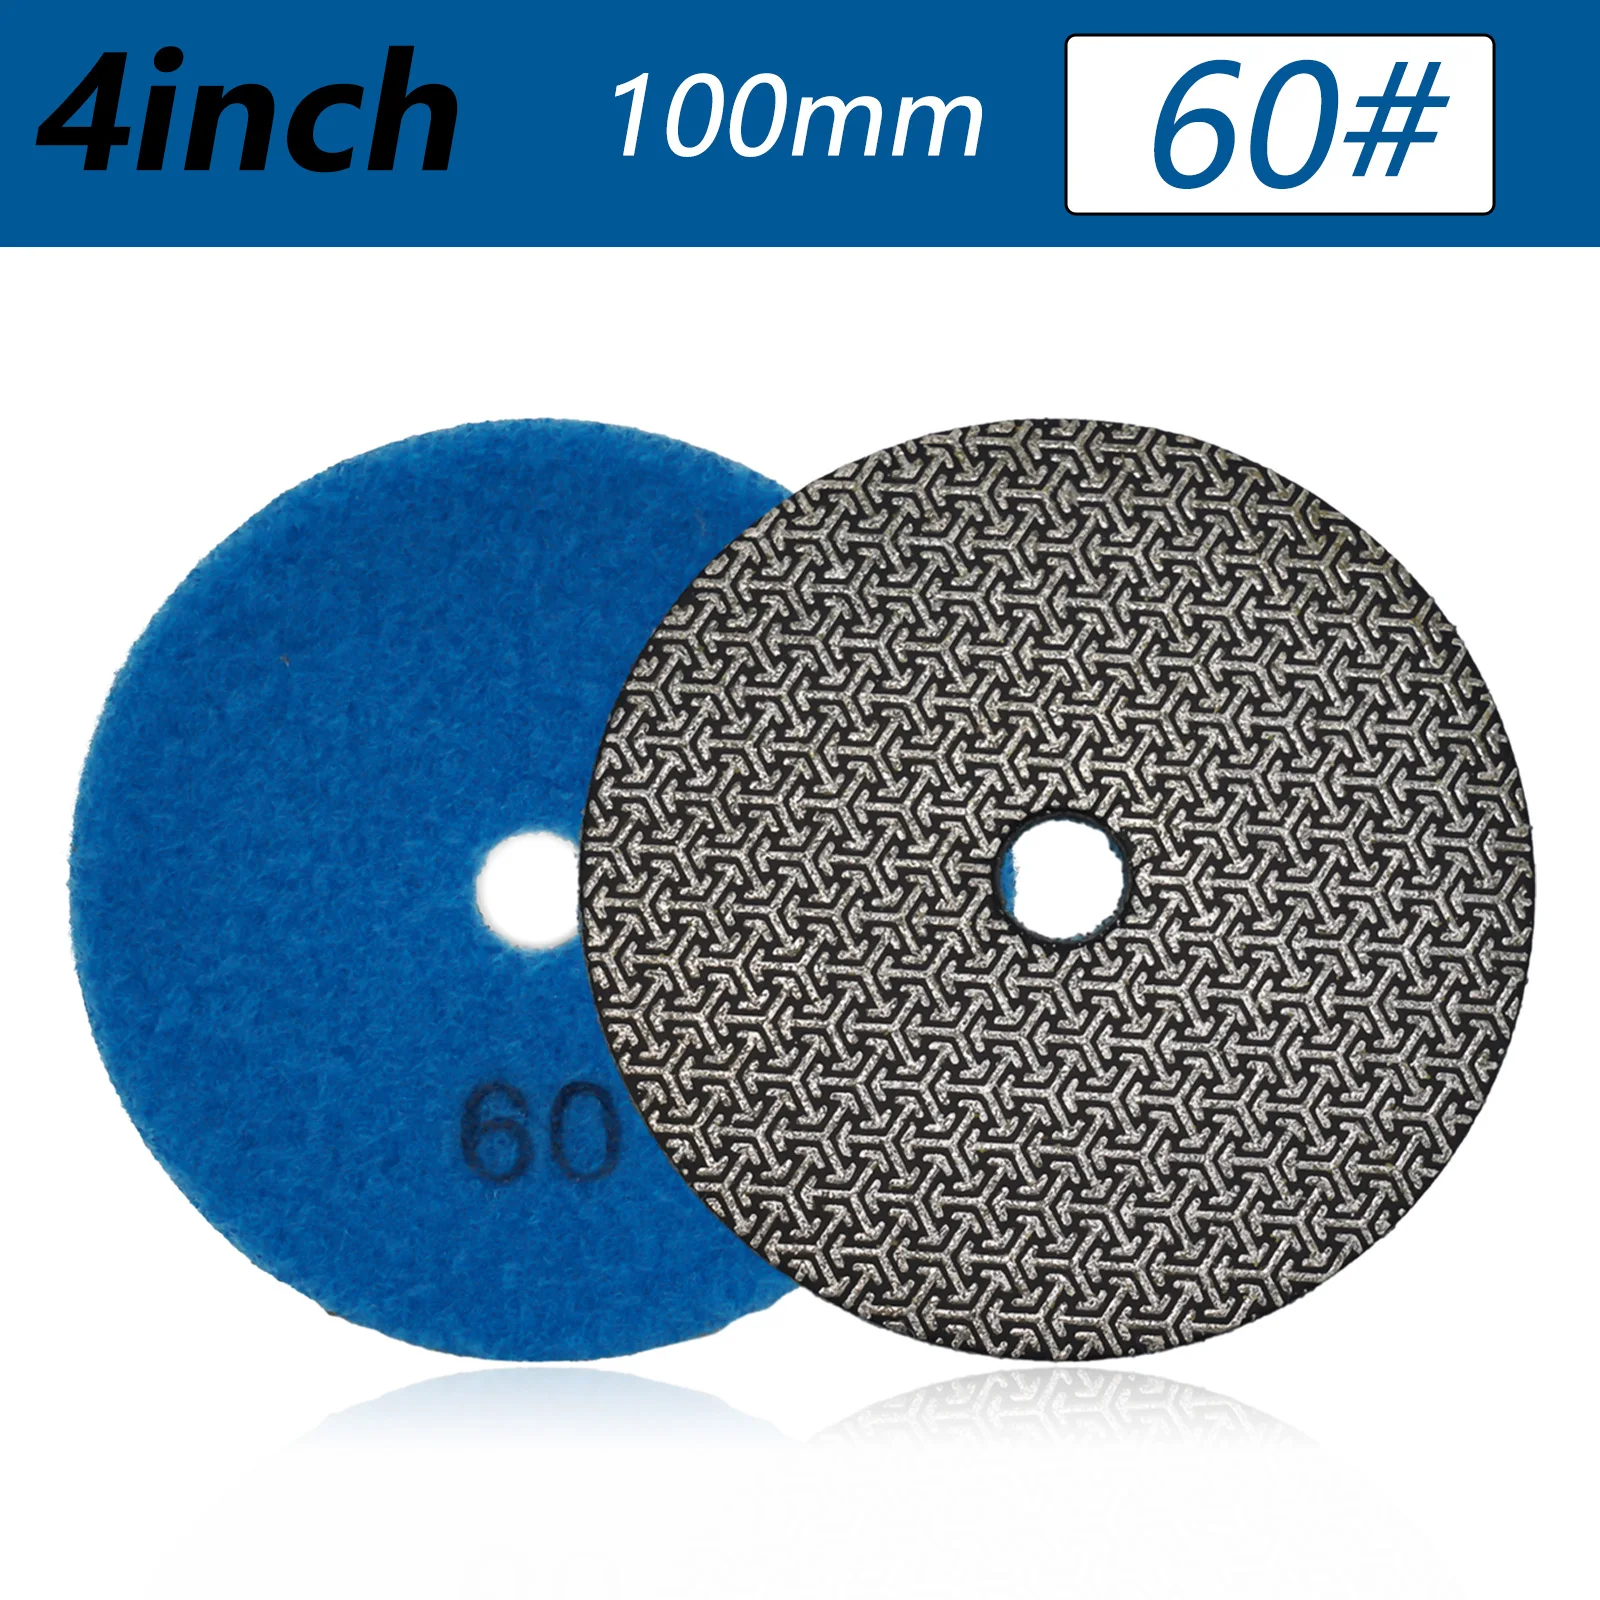 

Electroplated Pads Polishing Pad For Working On Surface Of Concrete Grinding Disc Polishing Sheet Sanding Pads